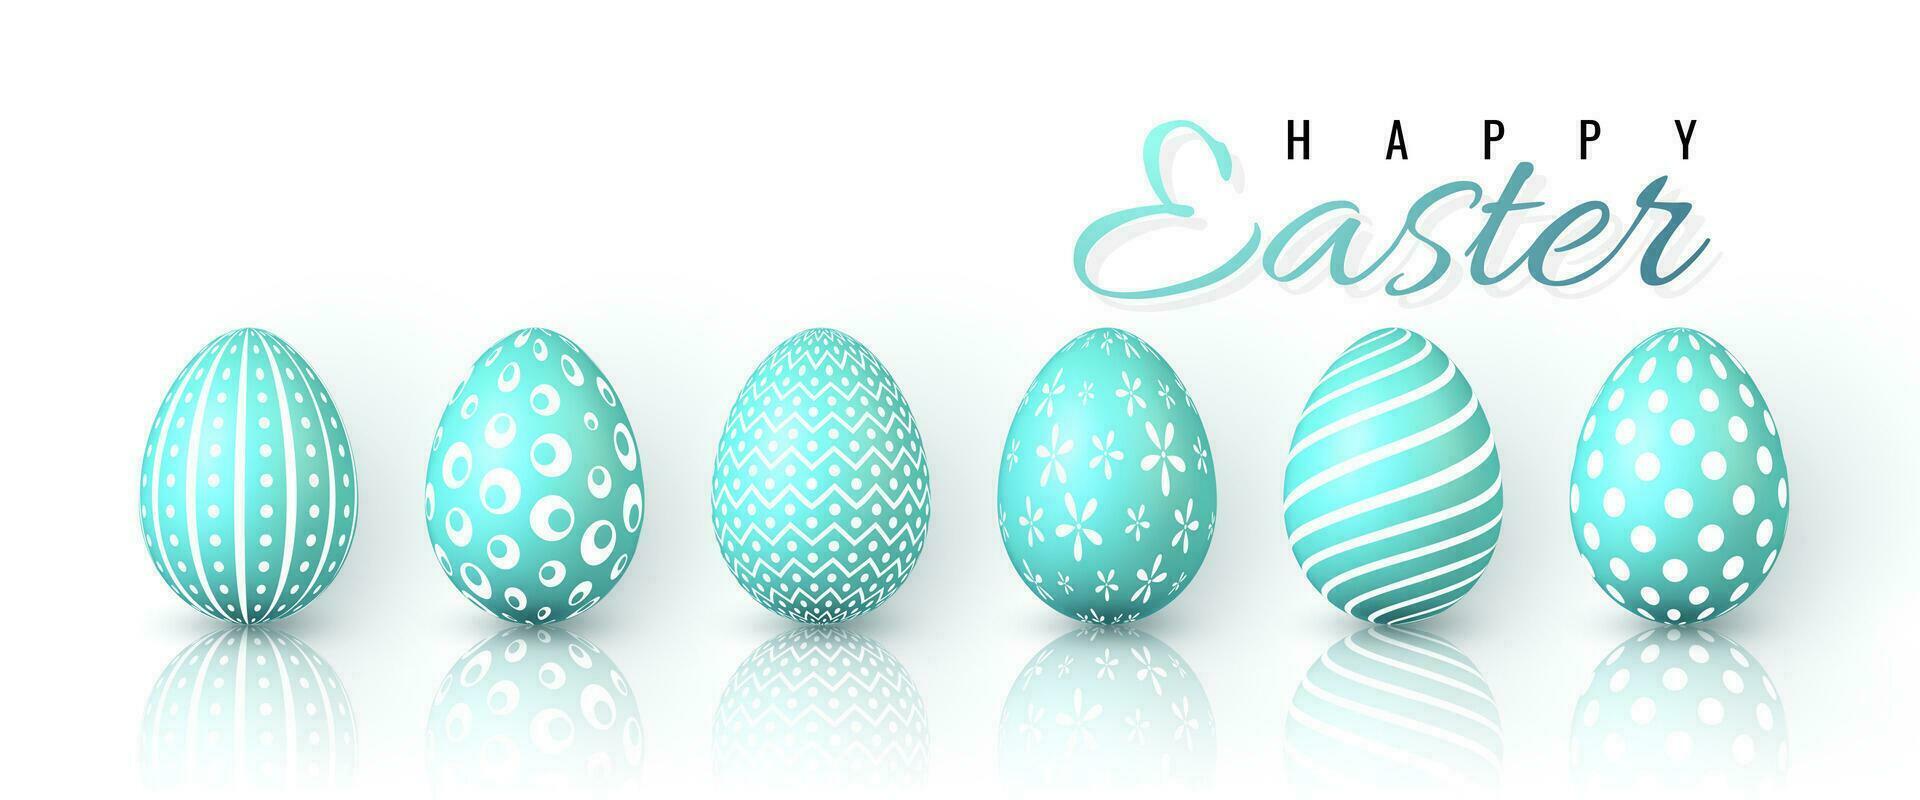 Happy Easter. Color Easter eggs on white background. Vector illustration